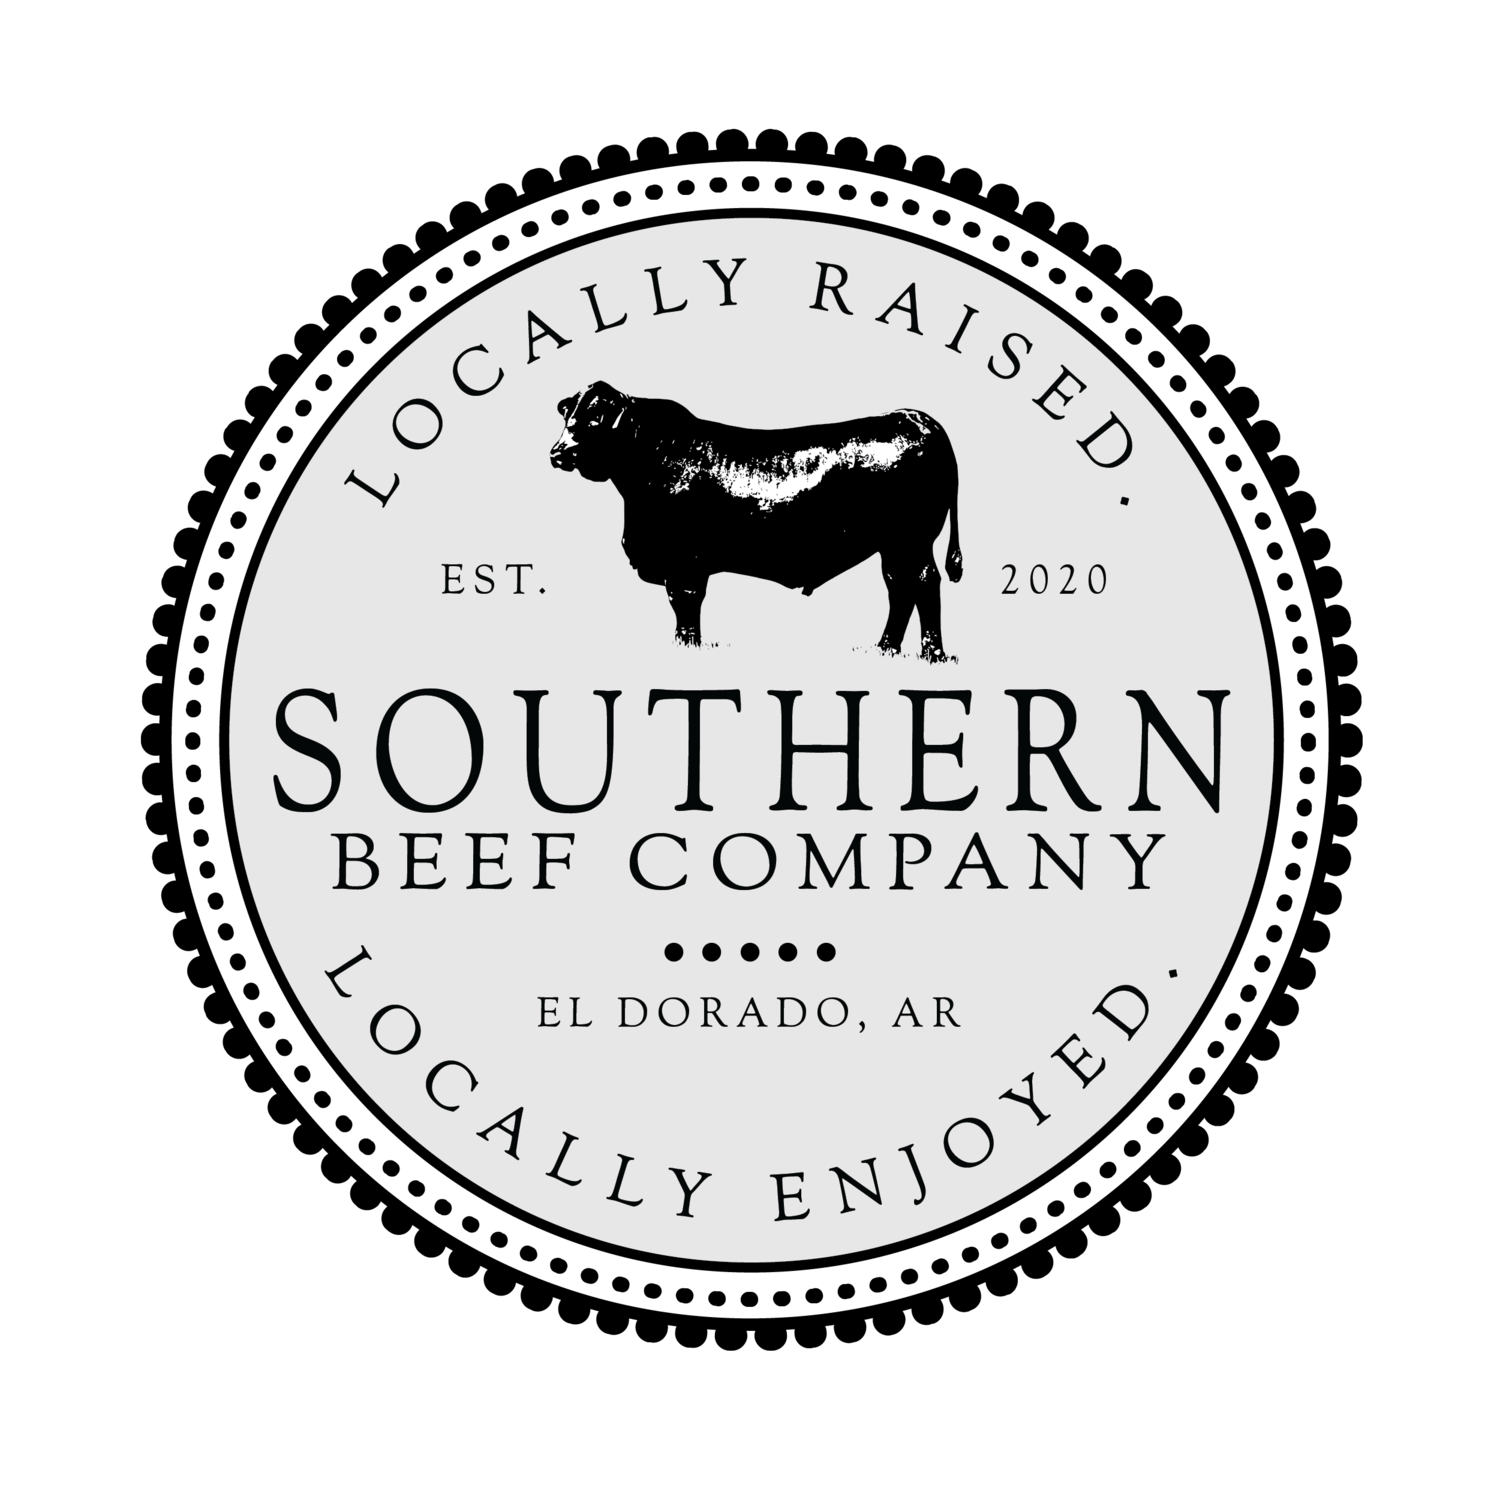 Southern Beef Company